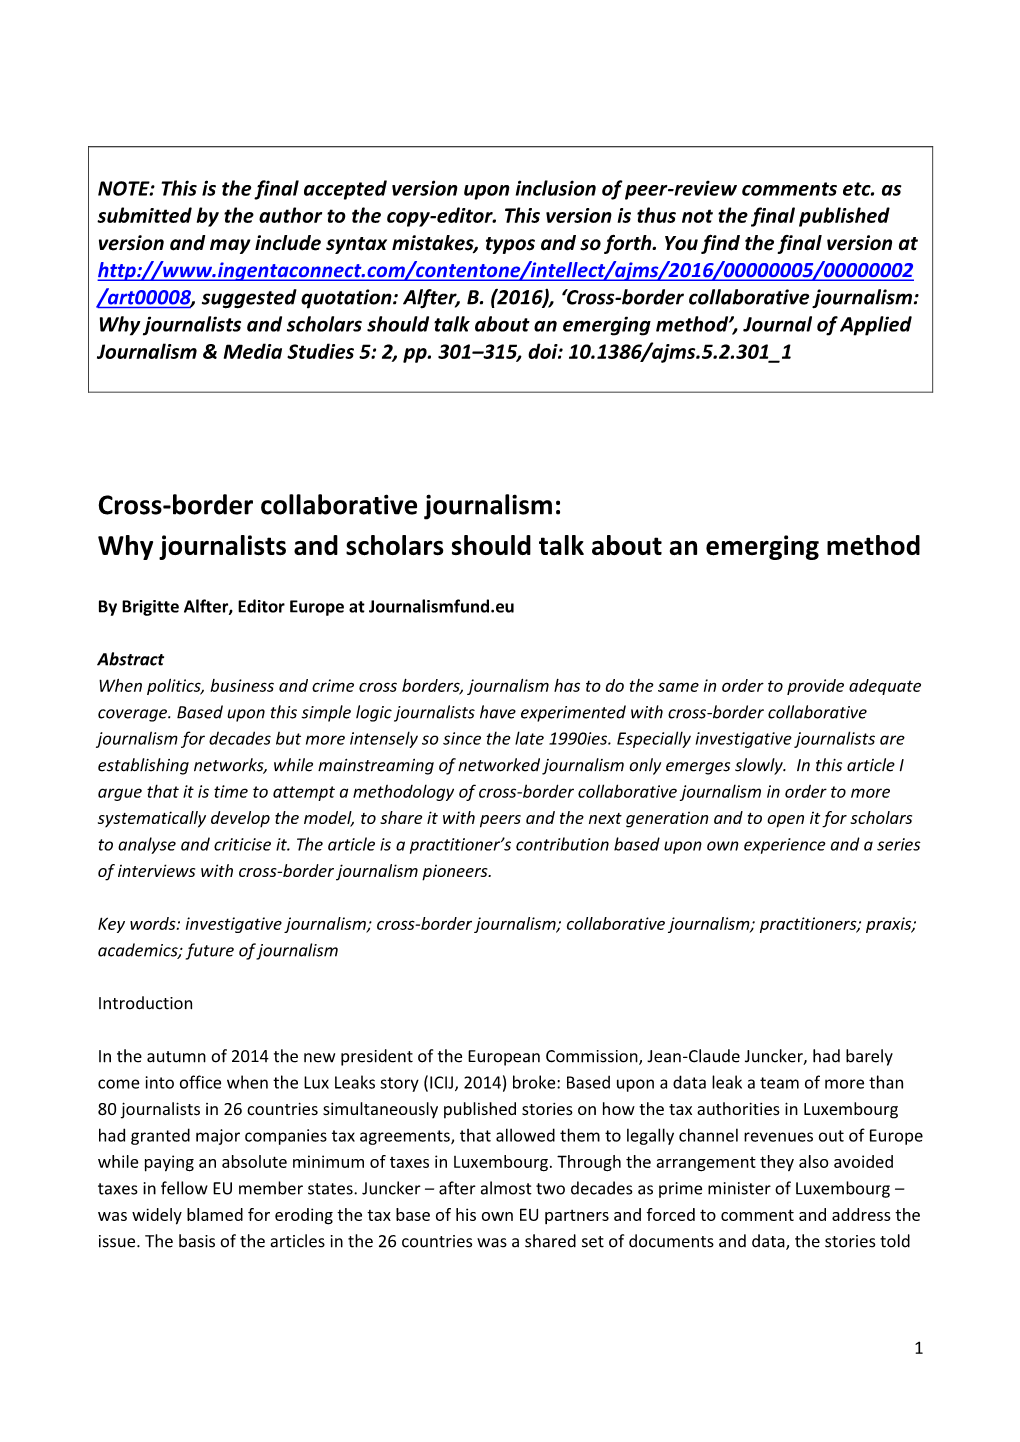 Cross-Border Collaborative Journalism: Why Journalists and Scholars Should Talk About an Emerging Method’, Journal of Applied Journalism & Media Studies 5: 2, Pp